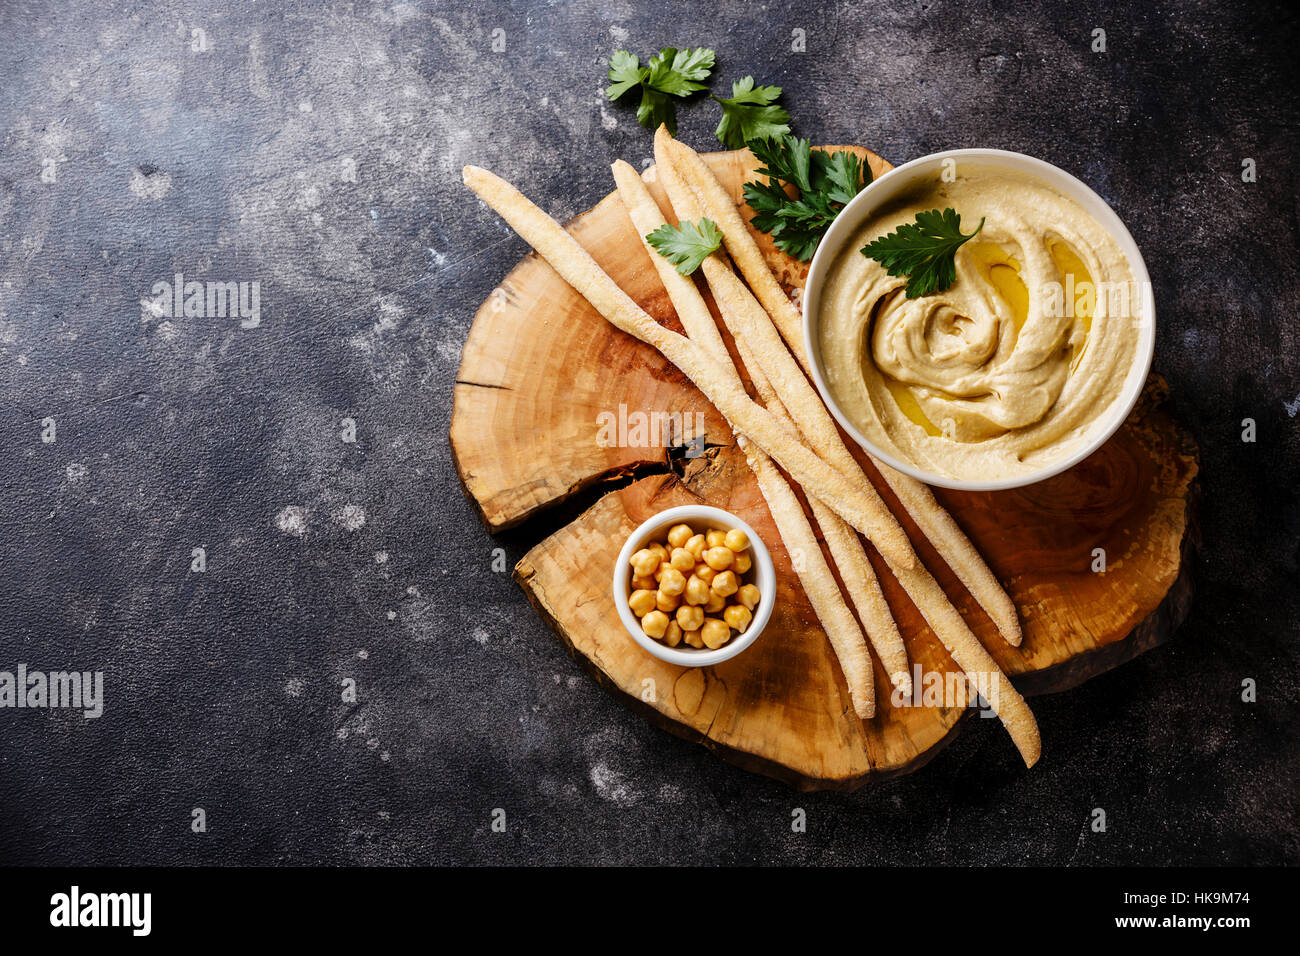 Homemade hummus with bread sticks and parsley on stone background copy space Stock Photo